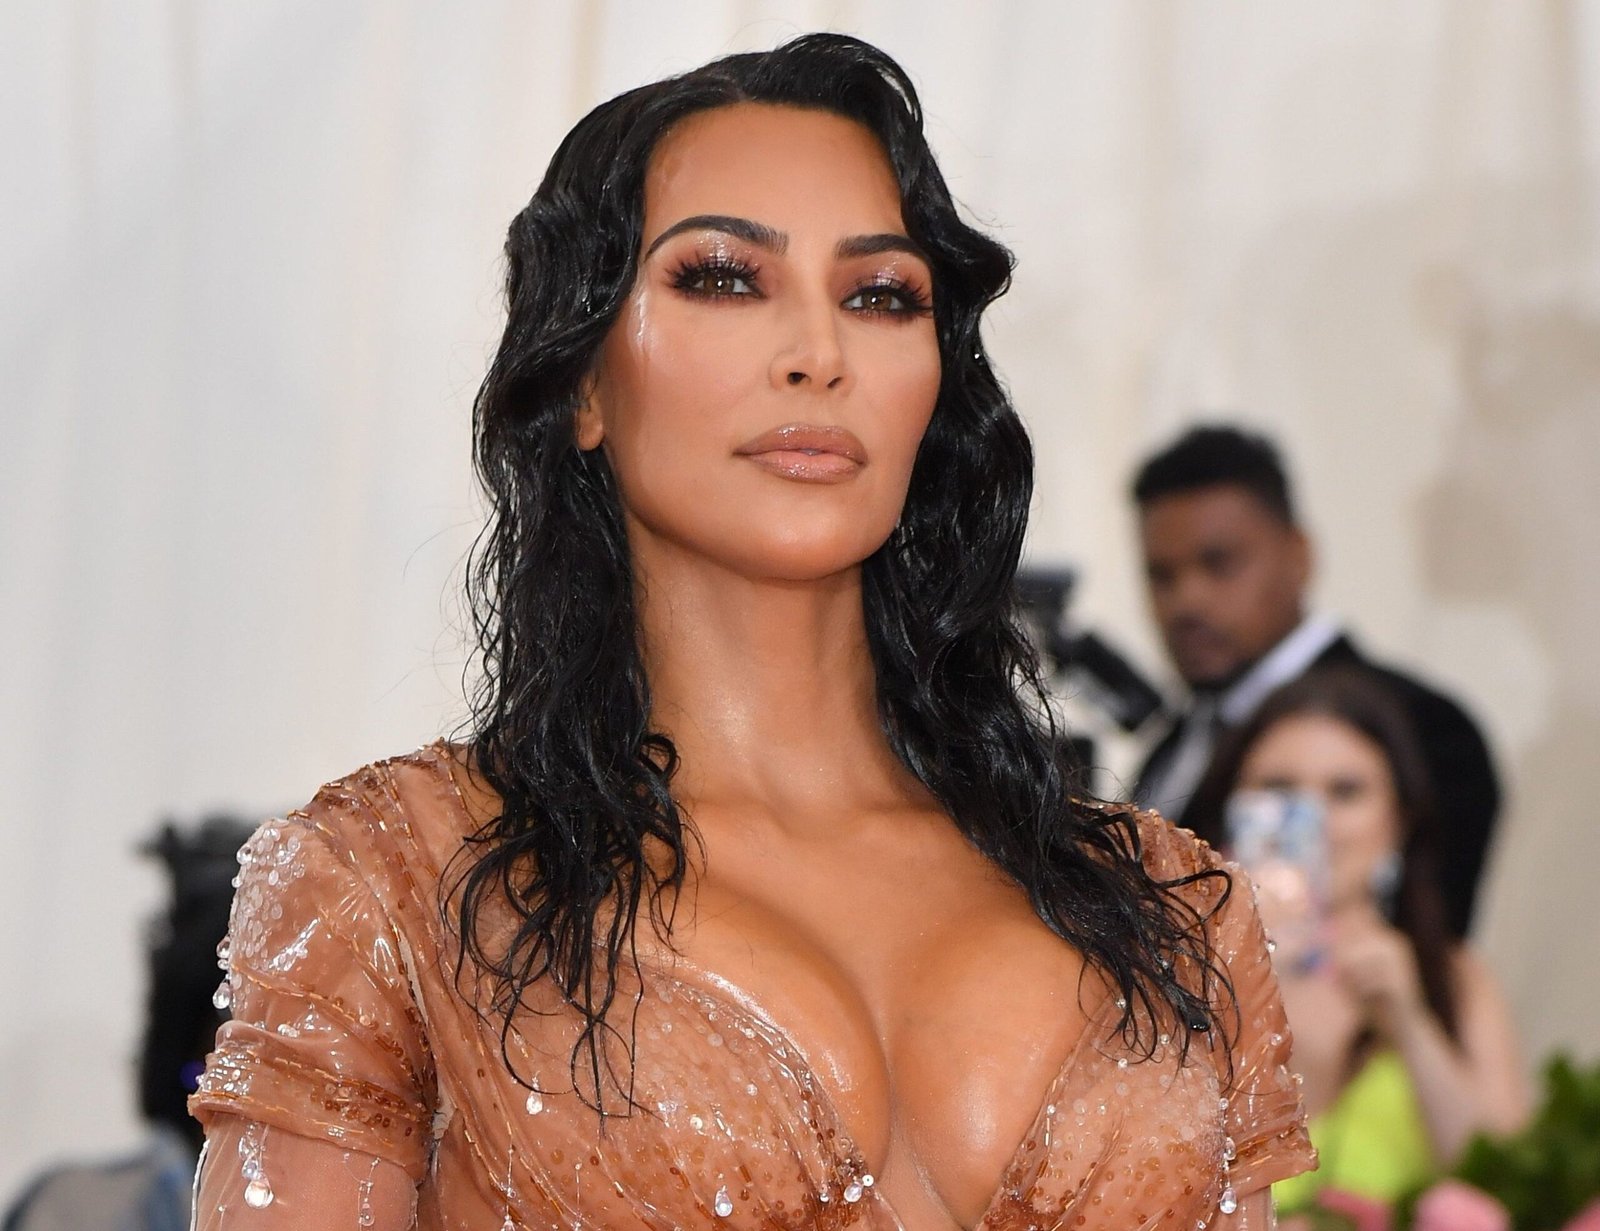 Who is courting Kim Kardashian after her divorce from Kanye West?